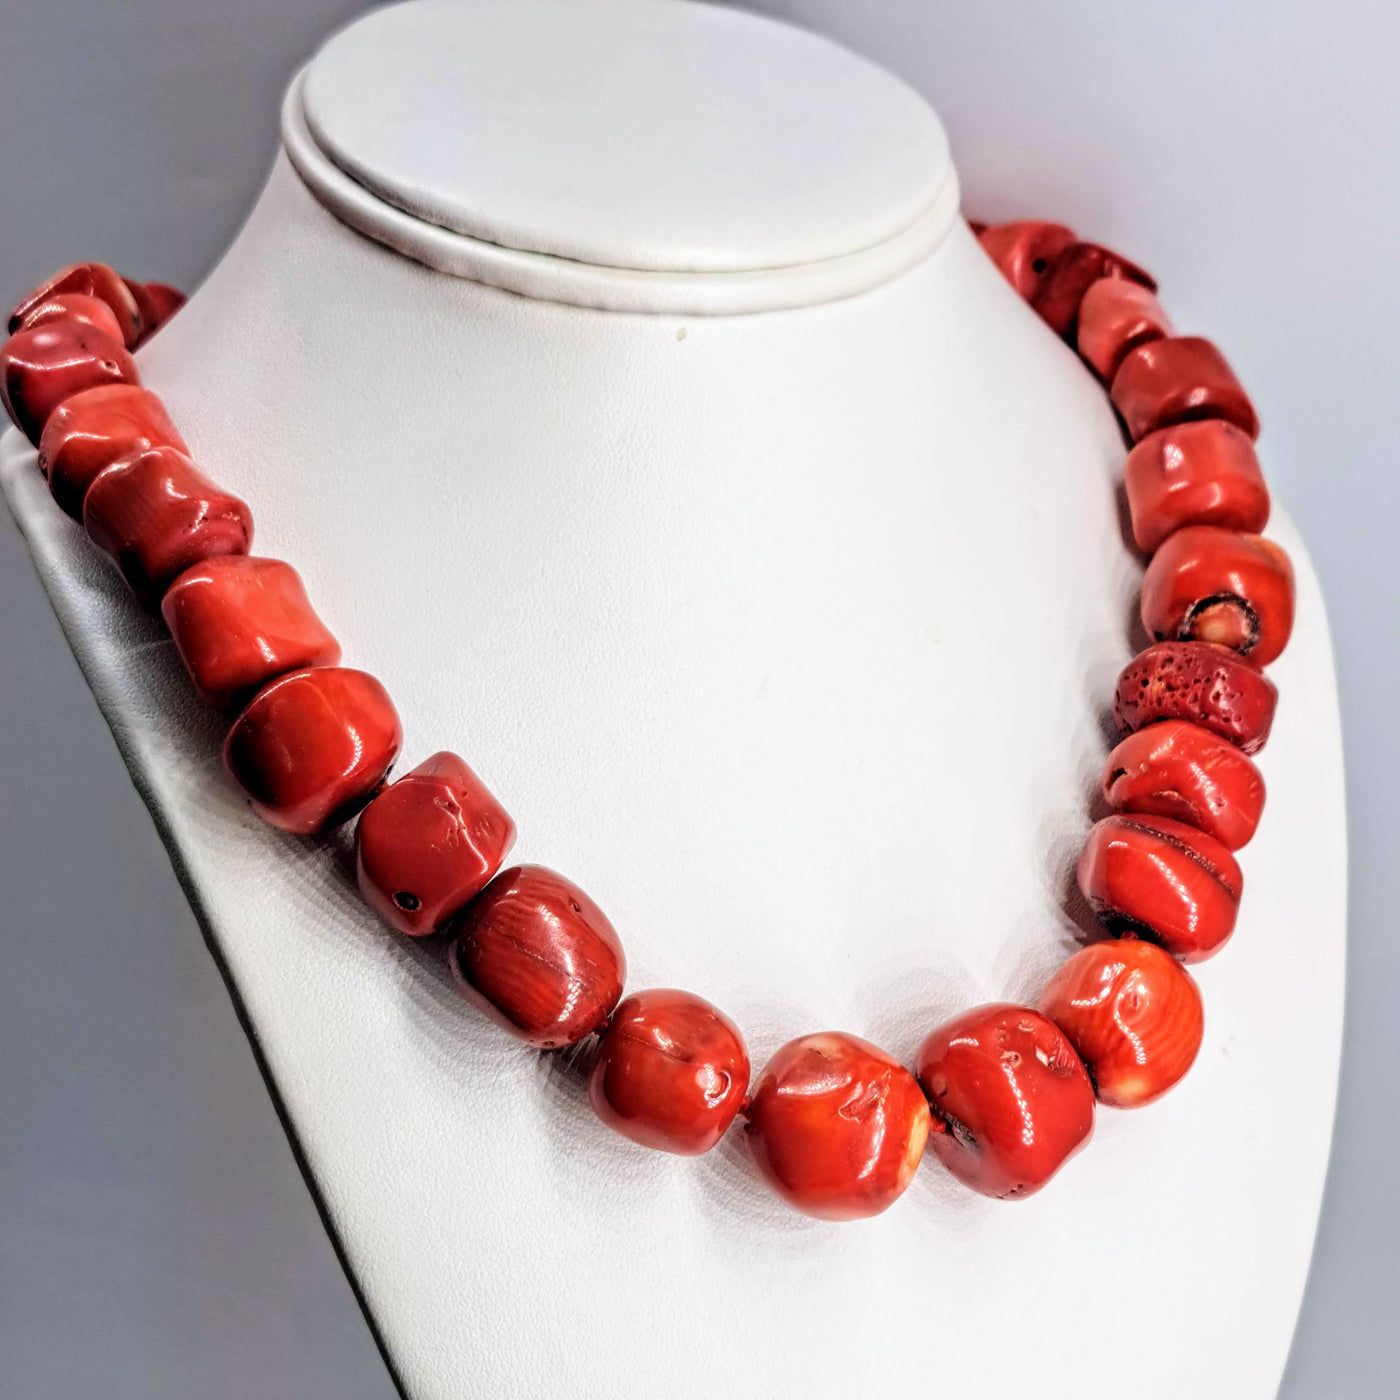 "Jungle Love" 20"-22" Necklace - Ethical Red Coral, Sterling